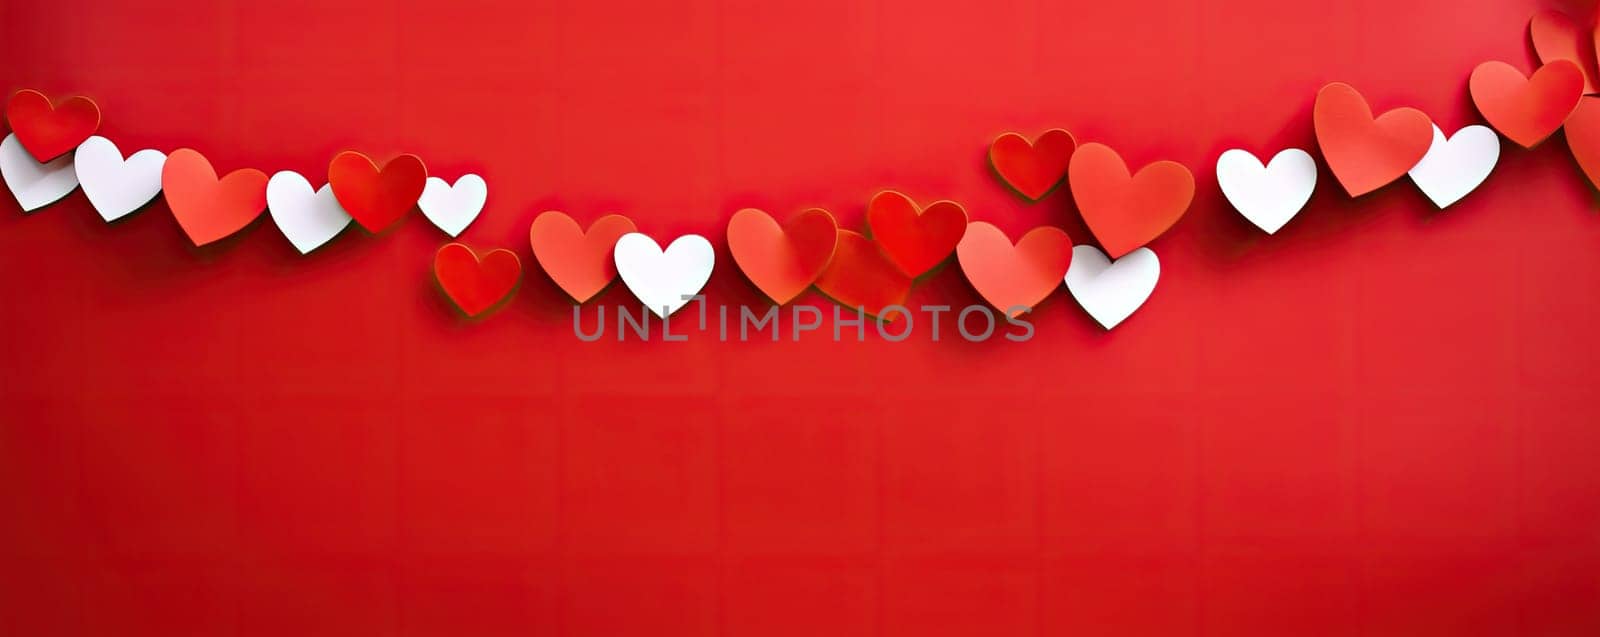 Bright red and white hearts on a contrasting red background add playfulness, coziness and warmth to the image by Yurich32